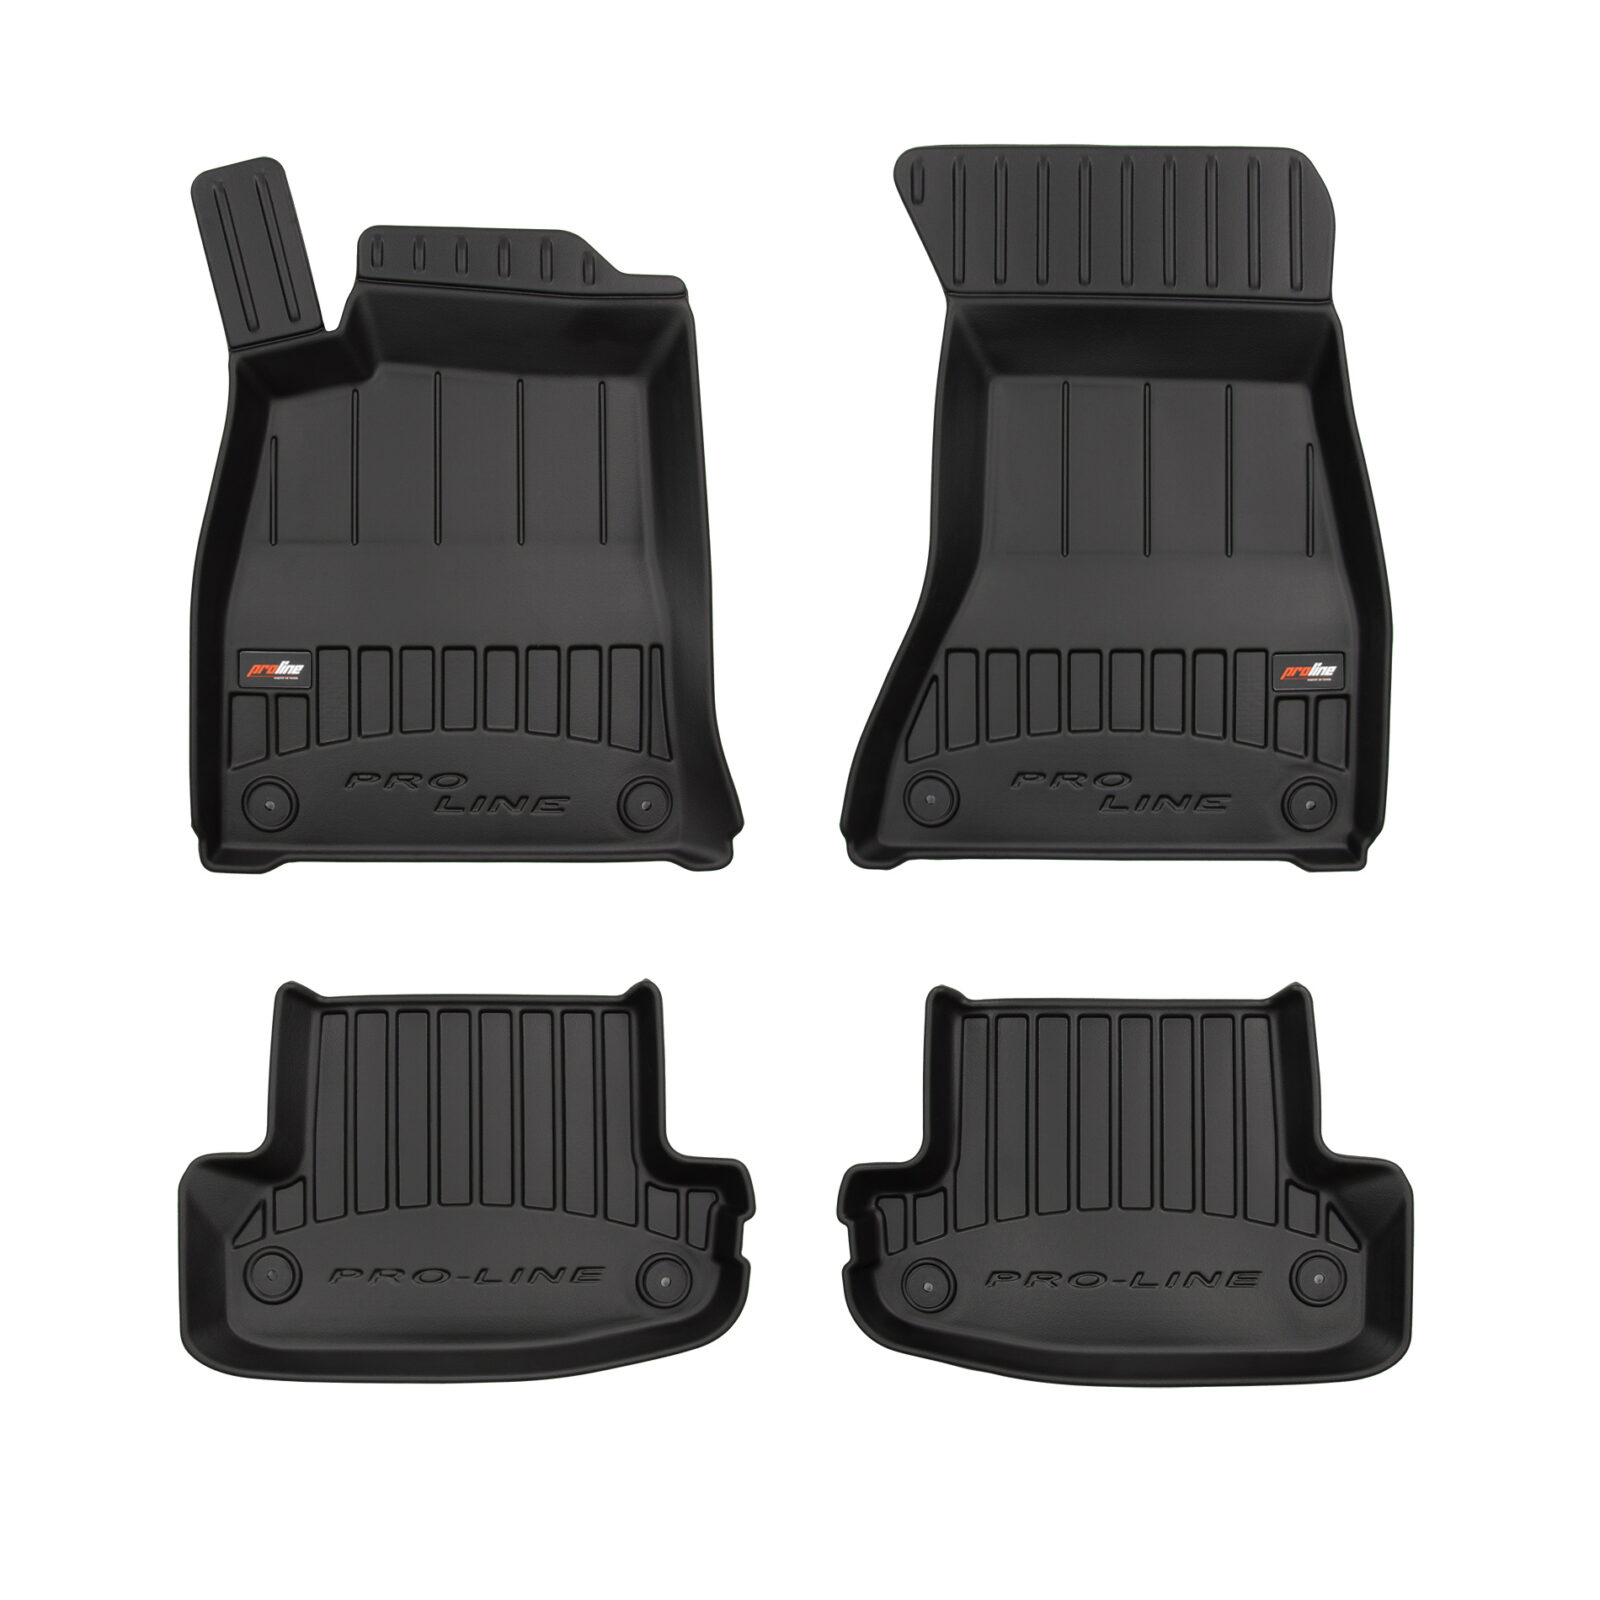 Car mats ProLine tailor-made since for Audi F5 A5 2016